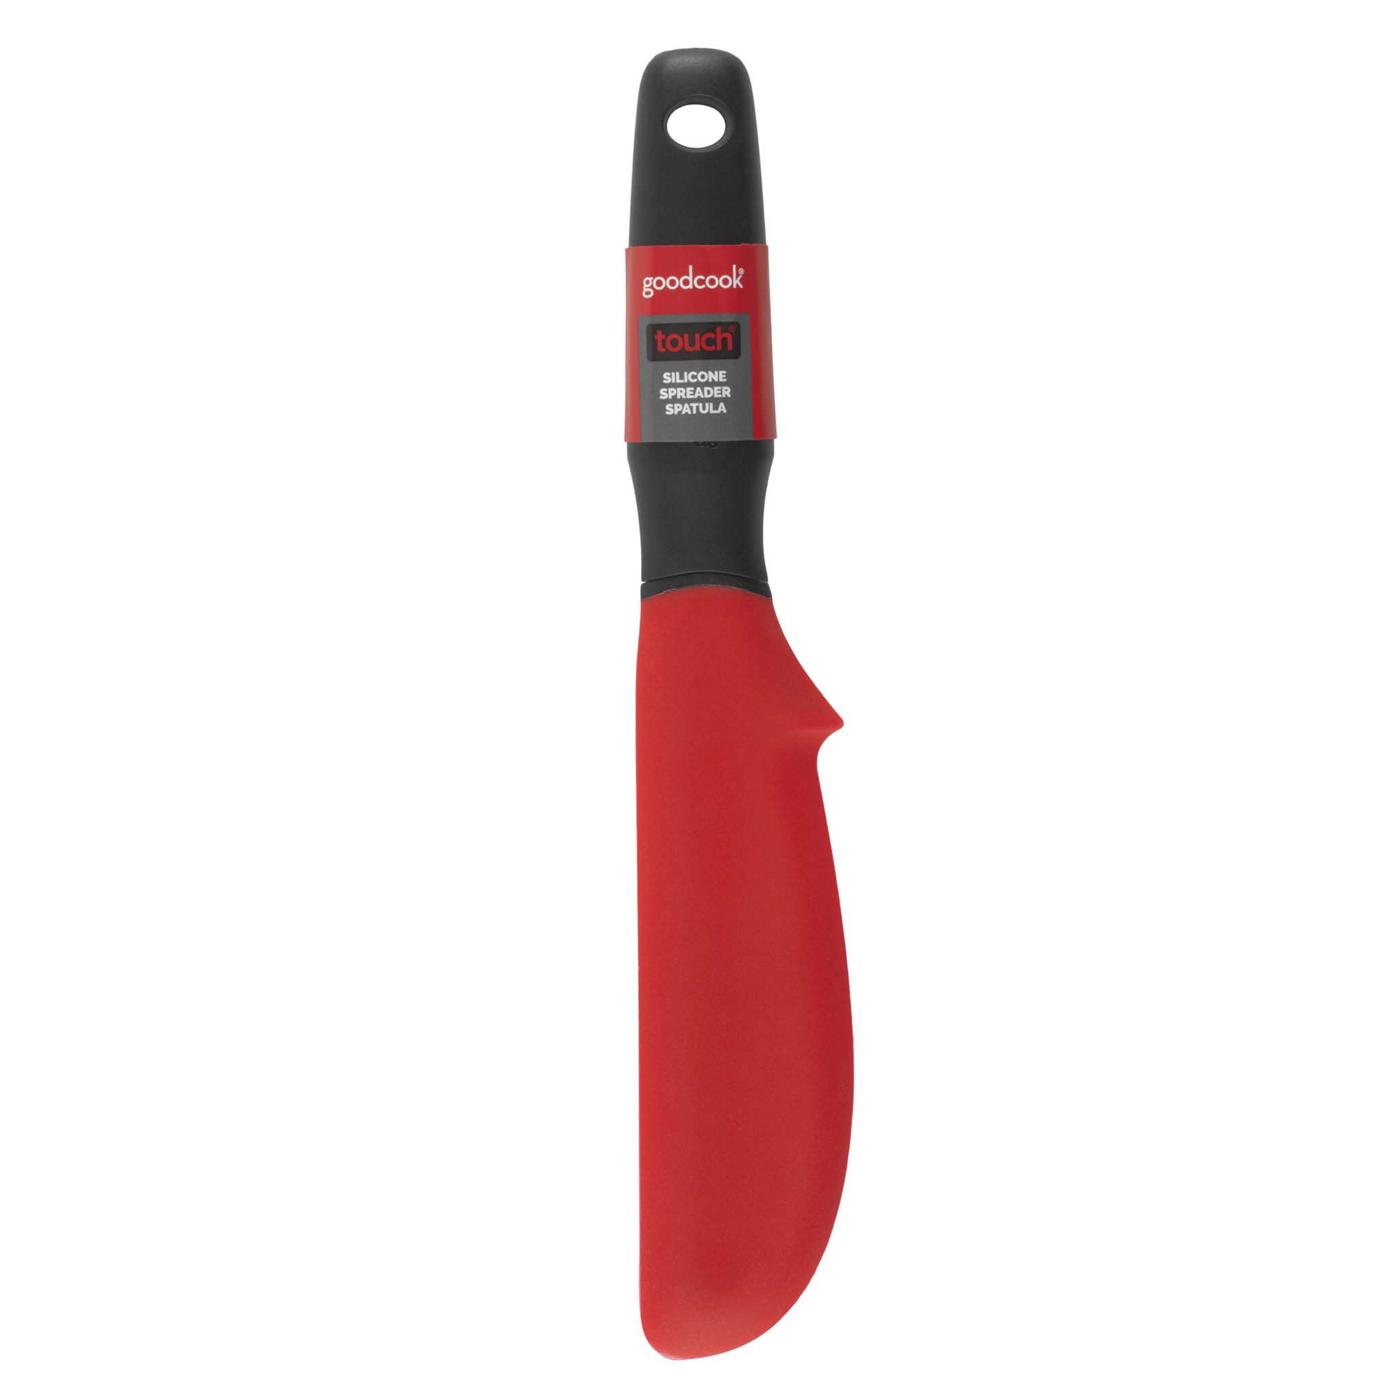 GoodCook Touch Silicone Spreader Spatula; image 1 of 4